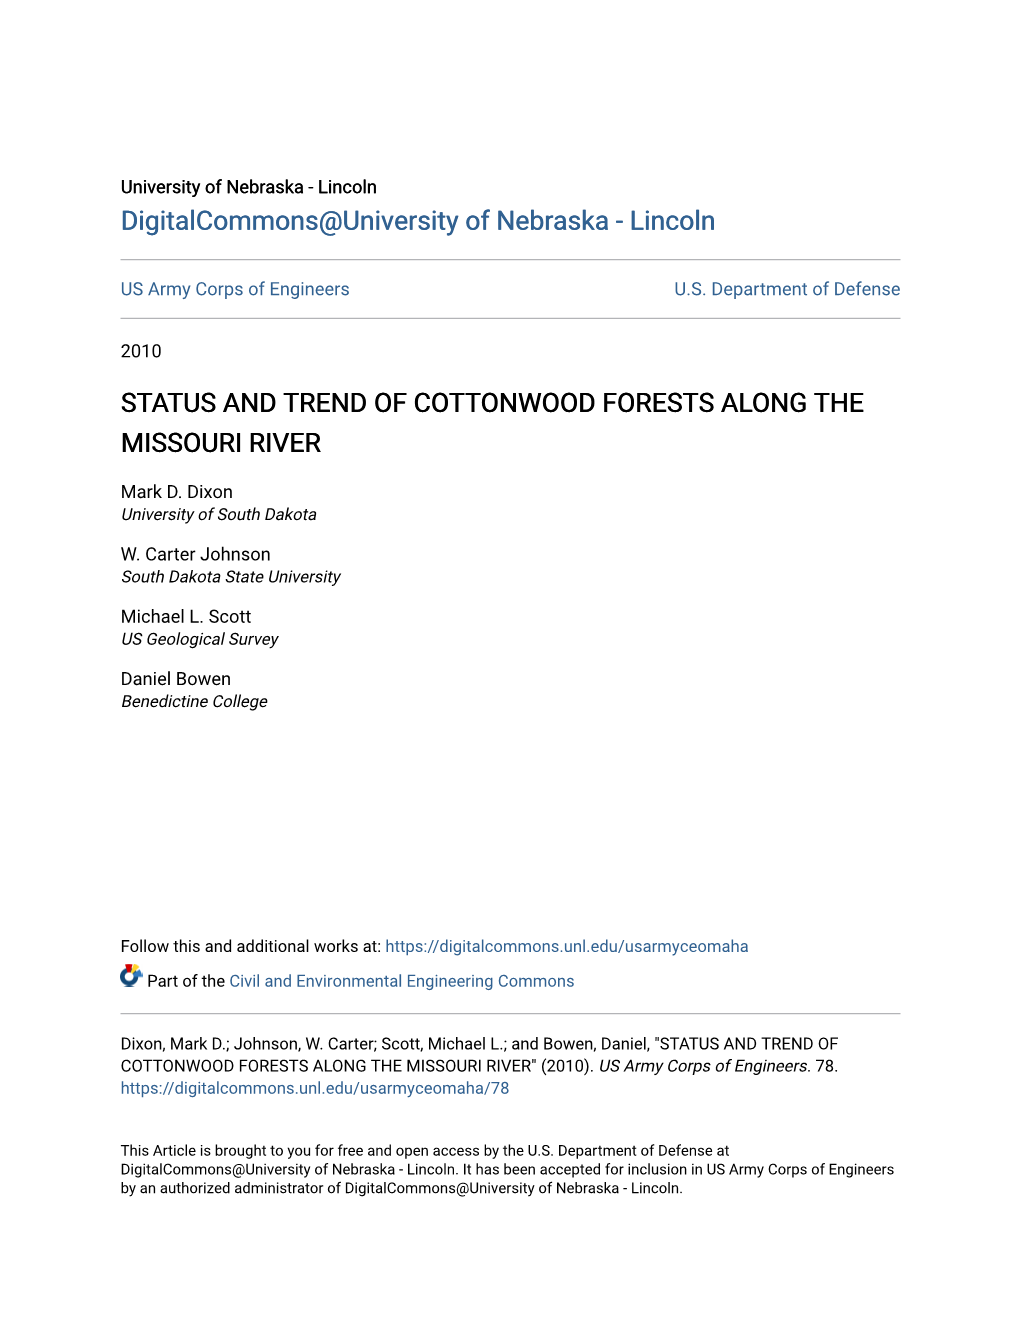 Status and Trend of Cottonwood Forests Along the Missouri River